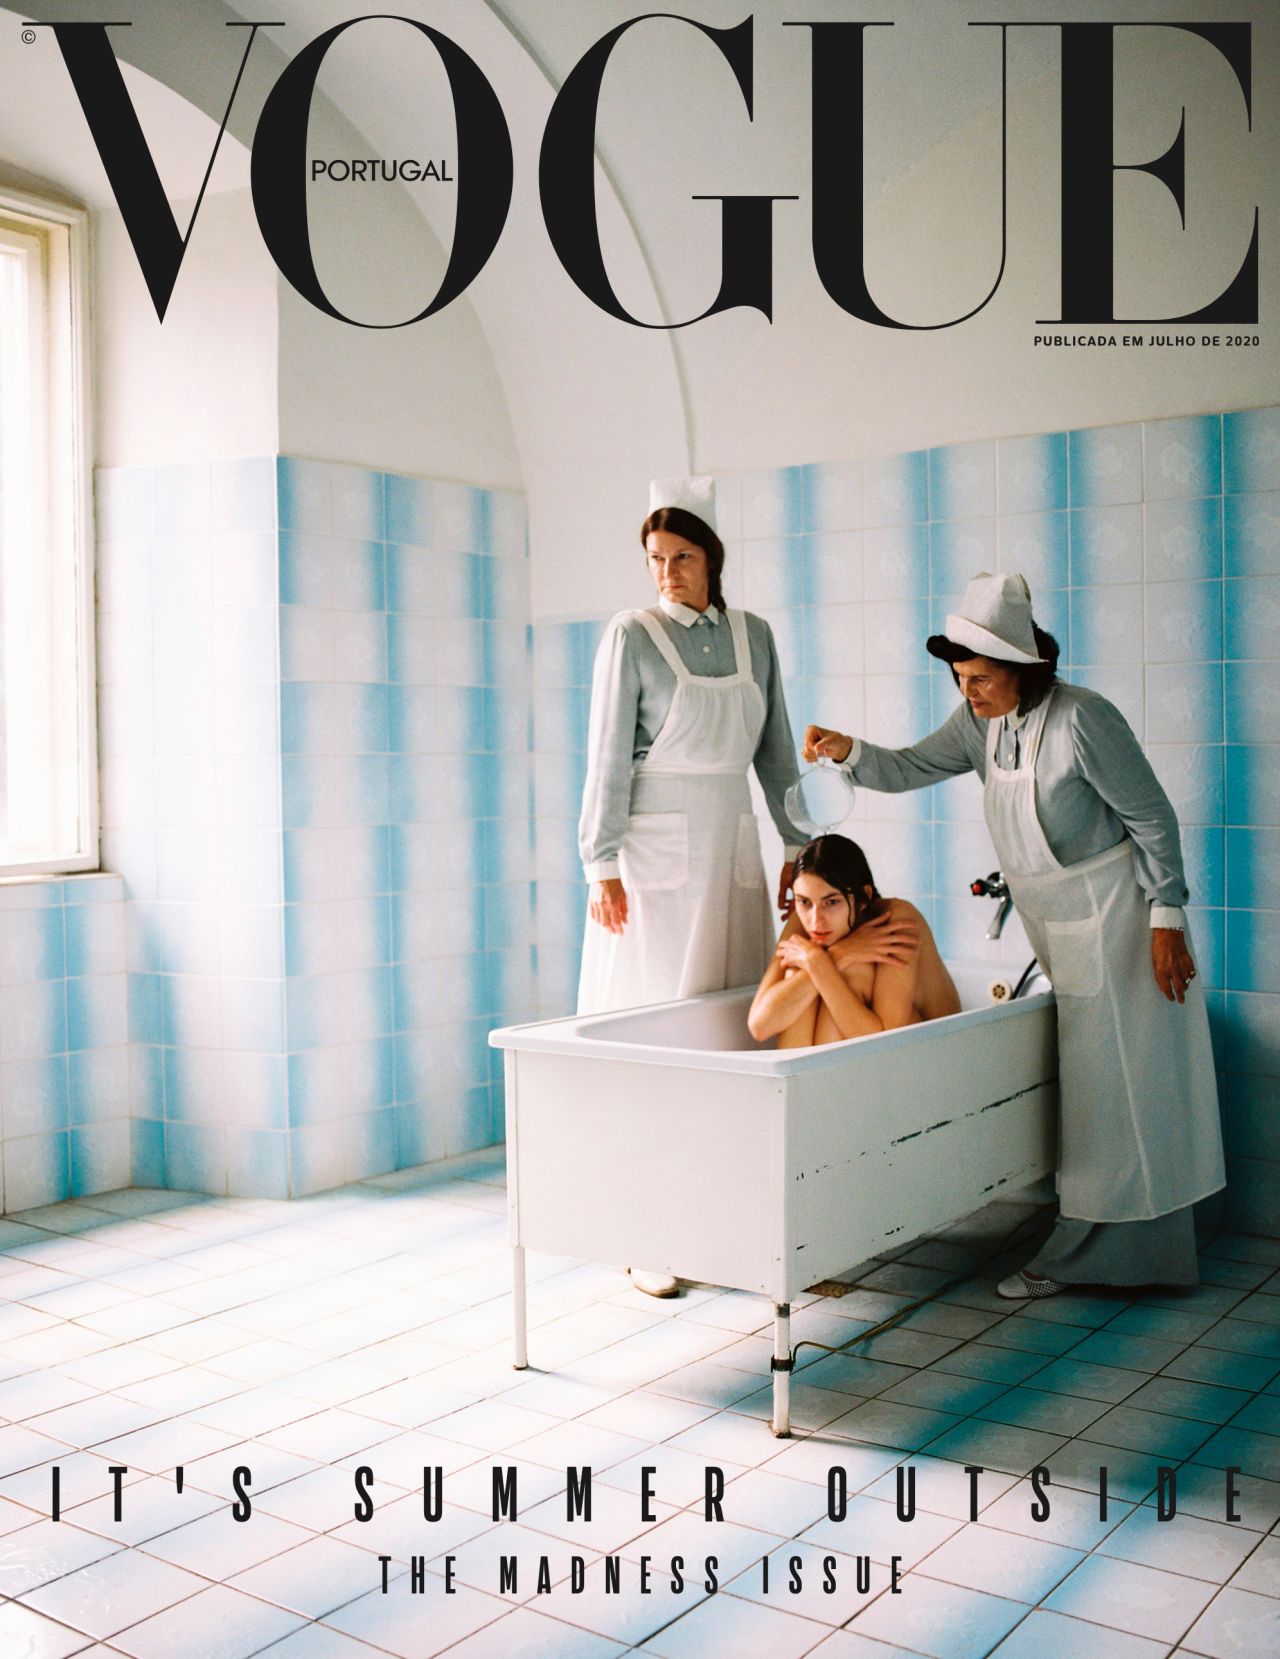 This, one of four covers from Vogue's 'Madness issue,' has been pulled after extensive backlash